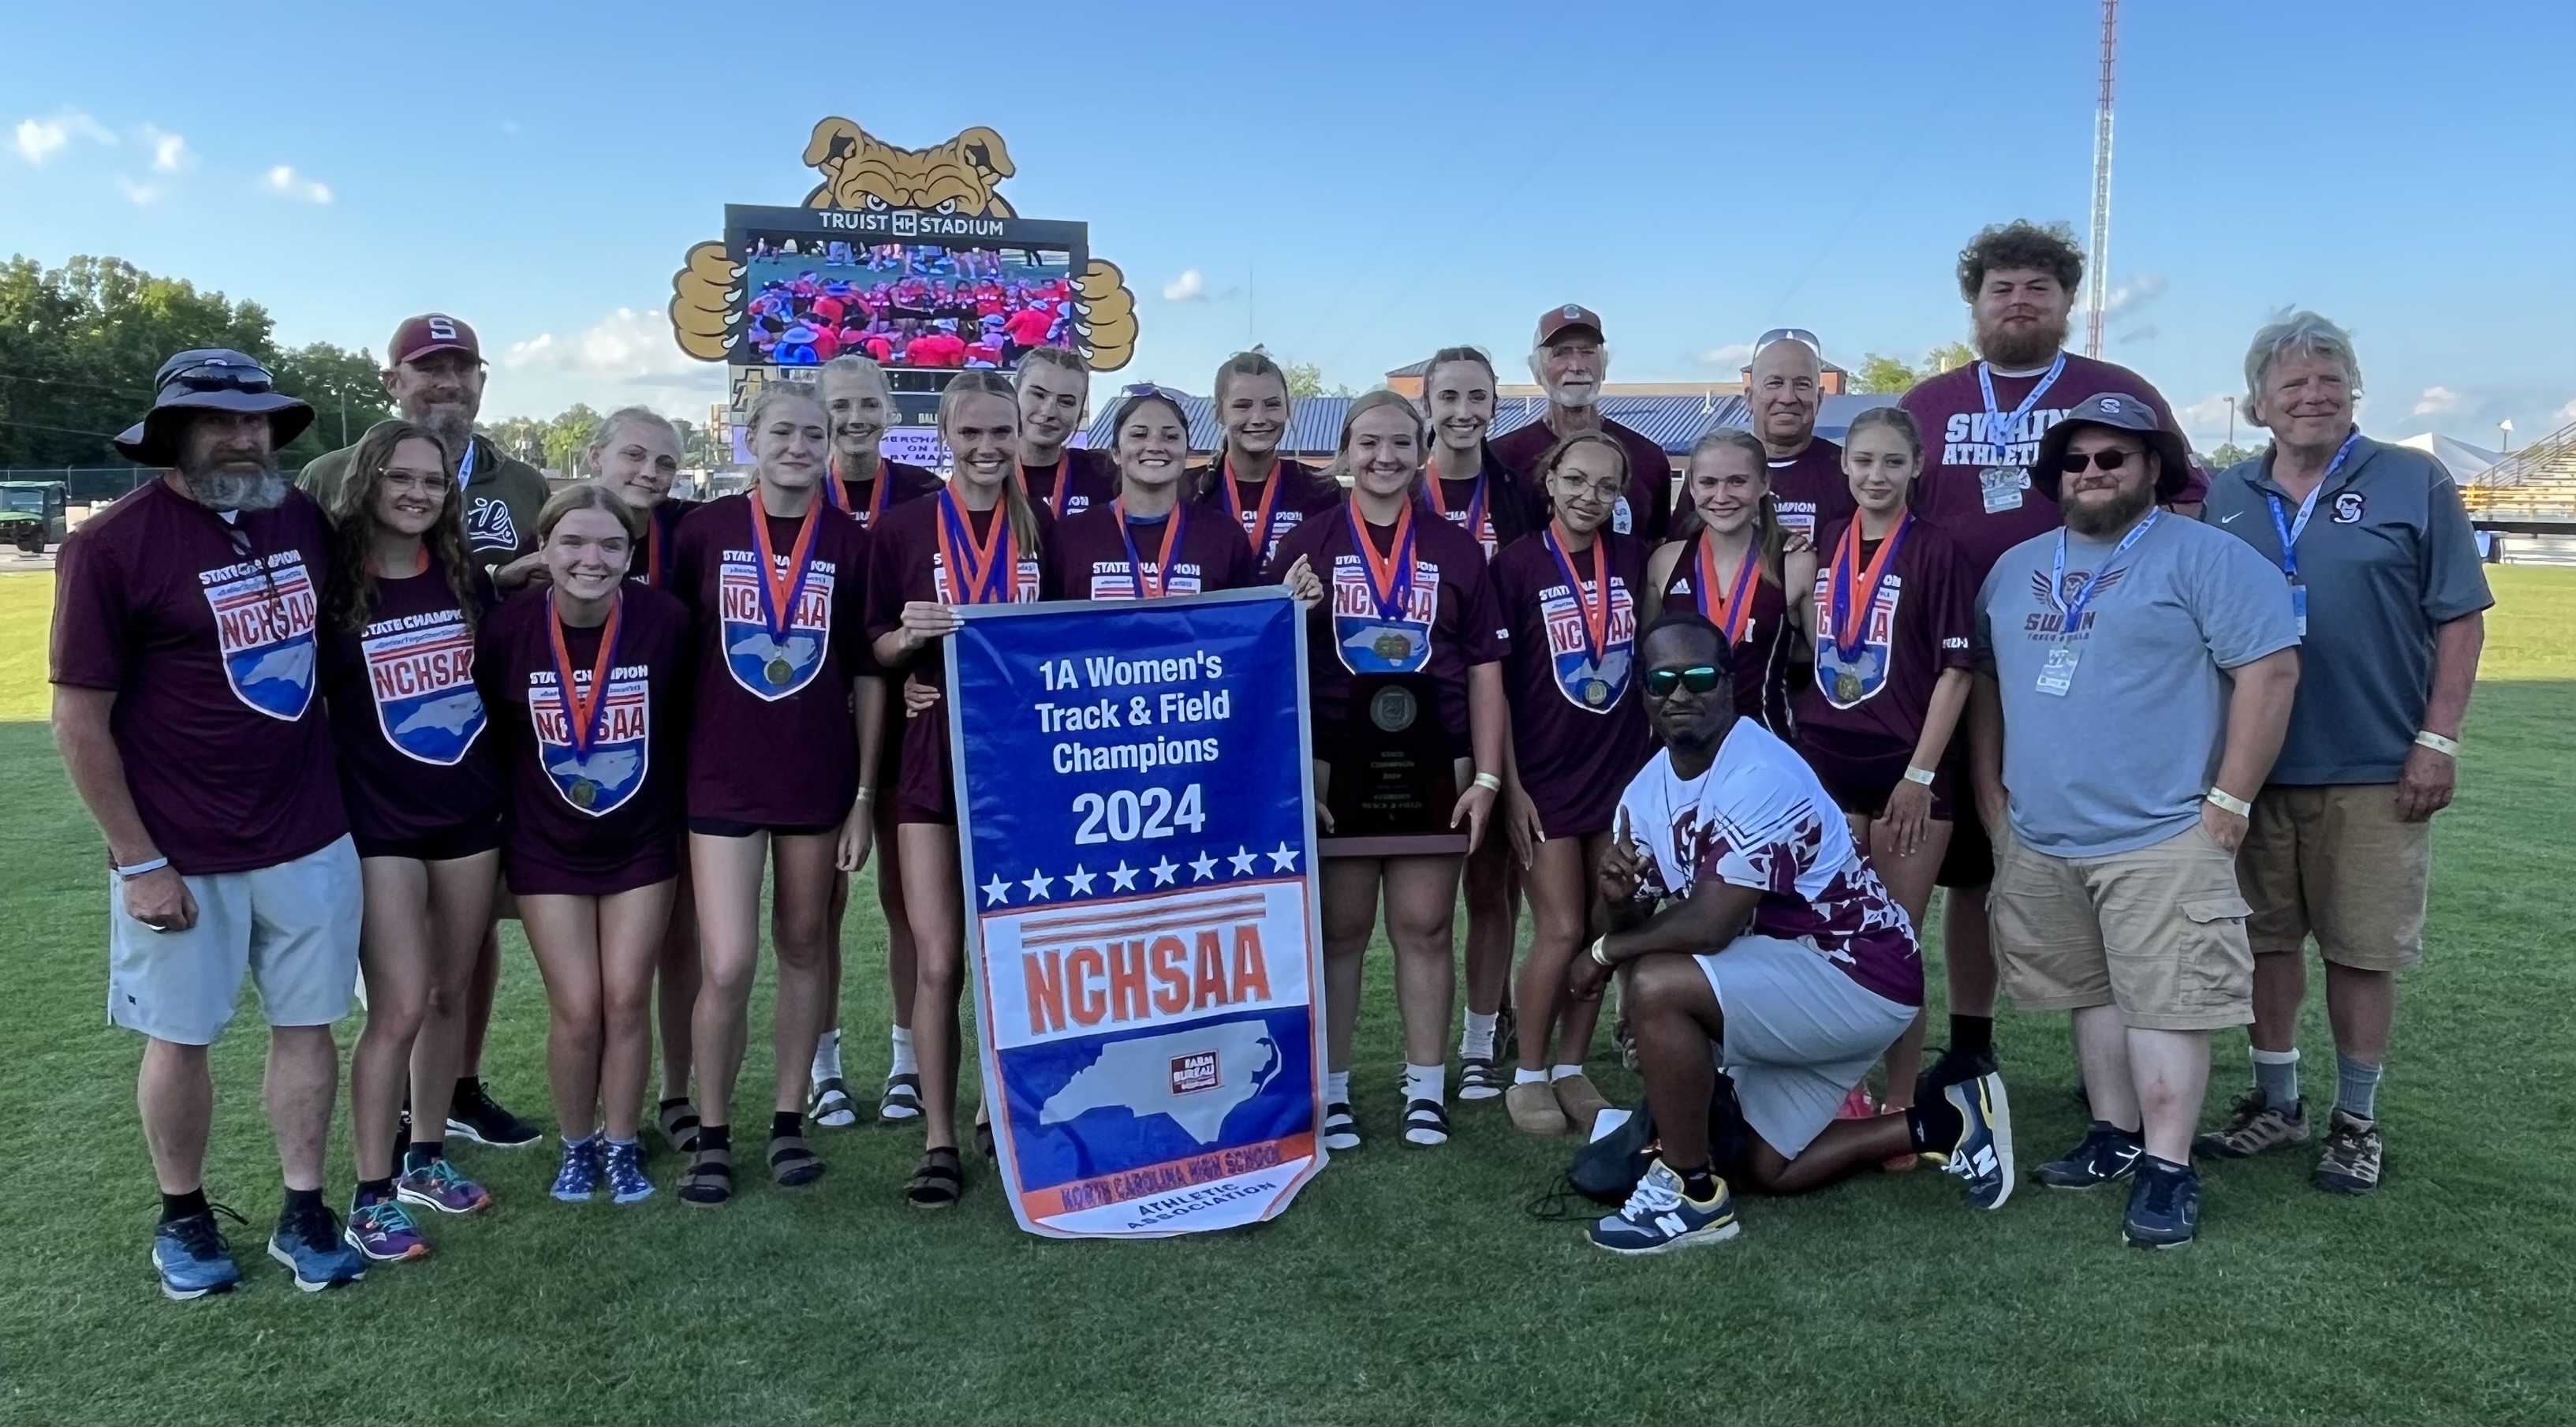 The Swain Lady Devils earned their 10th straight state title and fourth in outdoor track and field Monday when they were named the NCHSAA 1A track and field champions for 2024. Arizona Blankenship took first in the 1,600- and 3,200-meter run, Annie Lewis won the 800-meter event and the 4x800 meter relay team took first. 